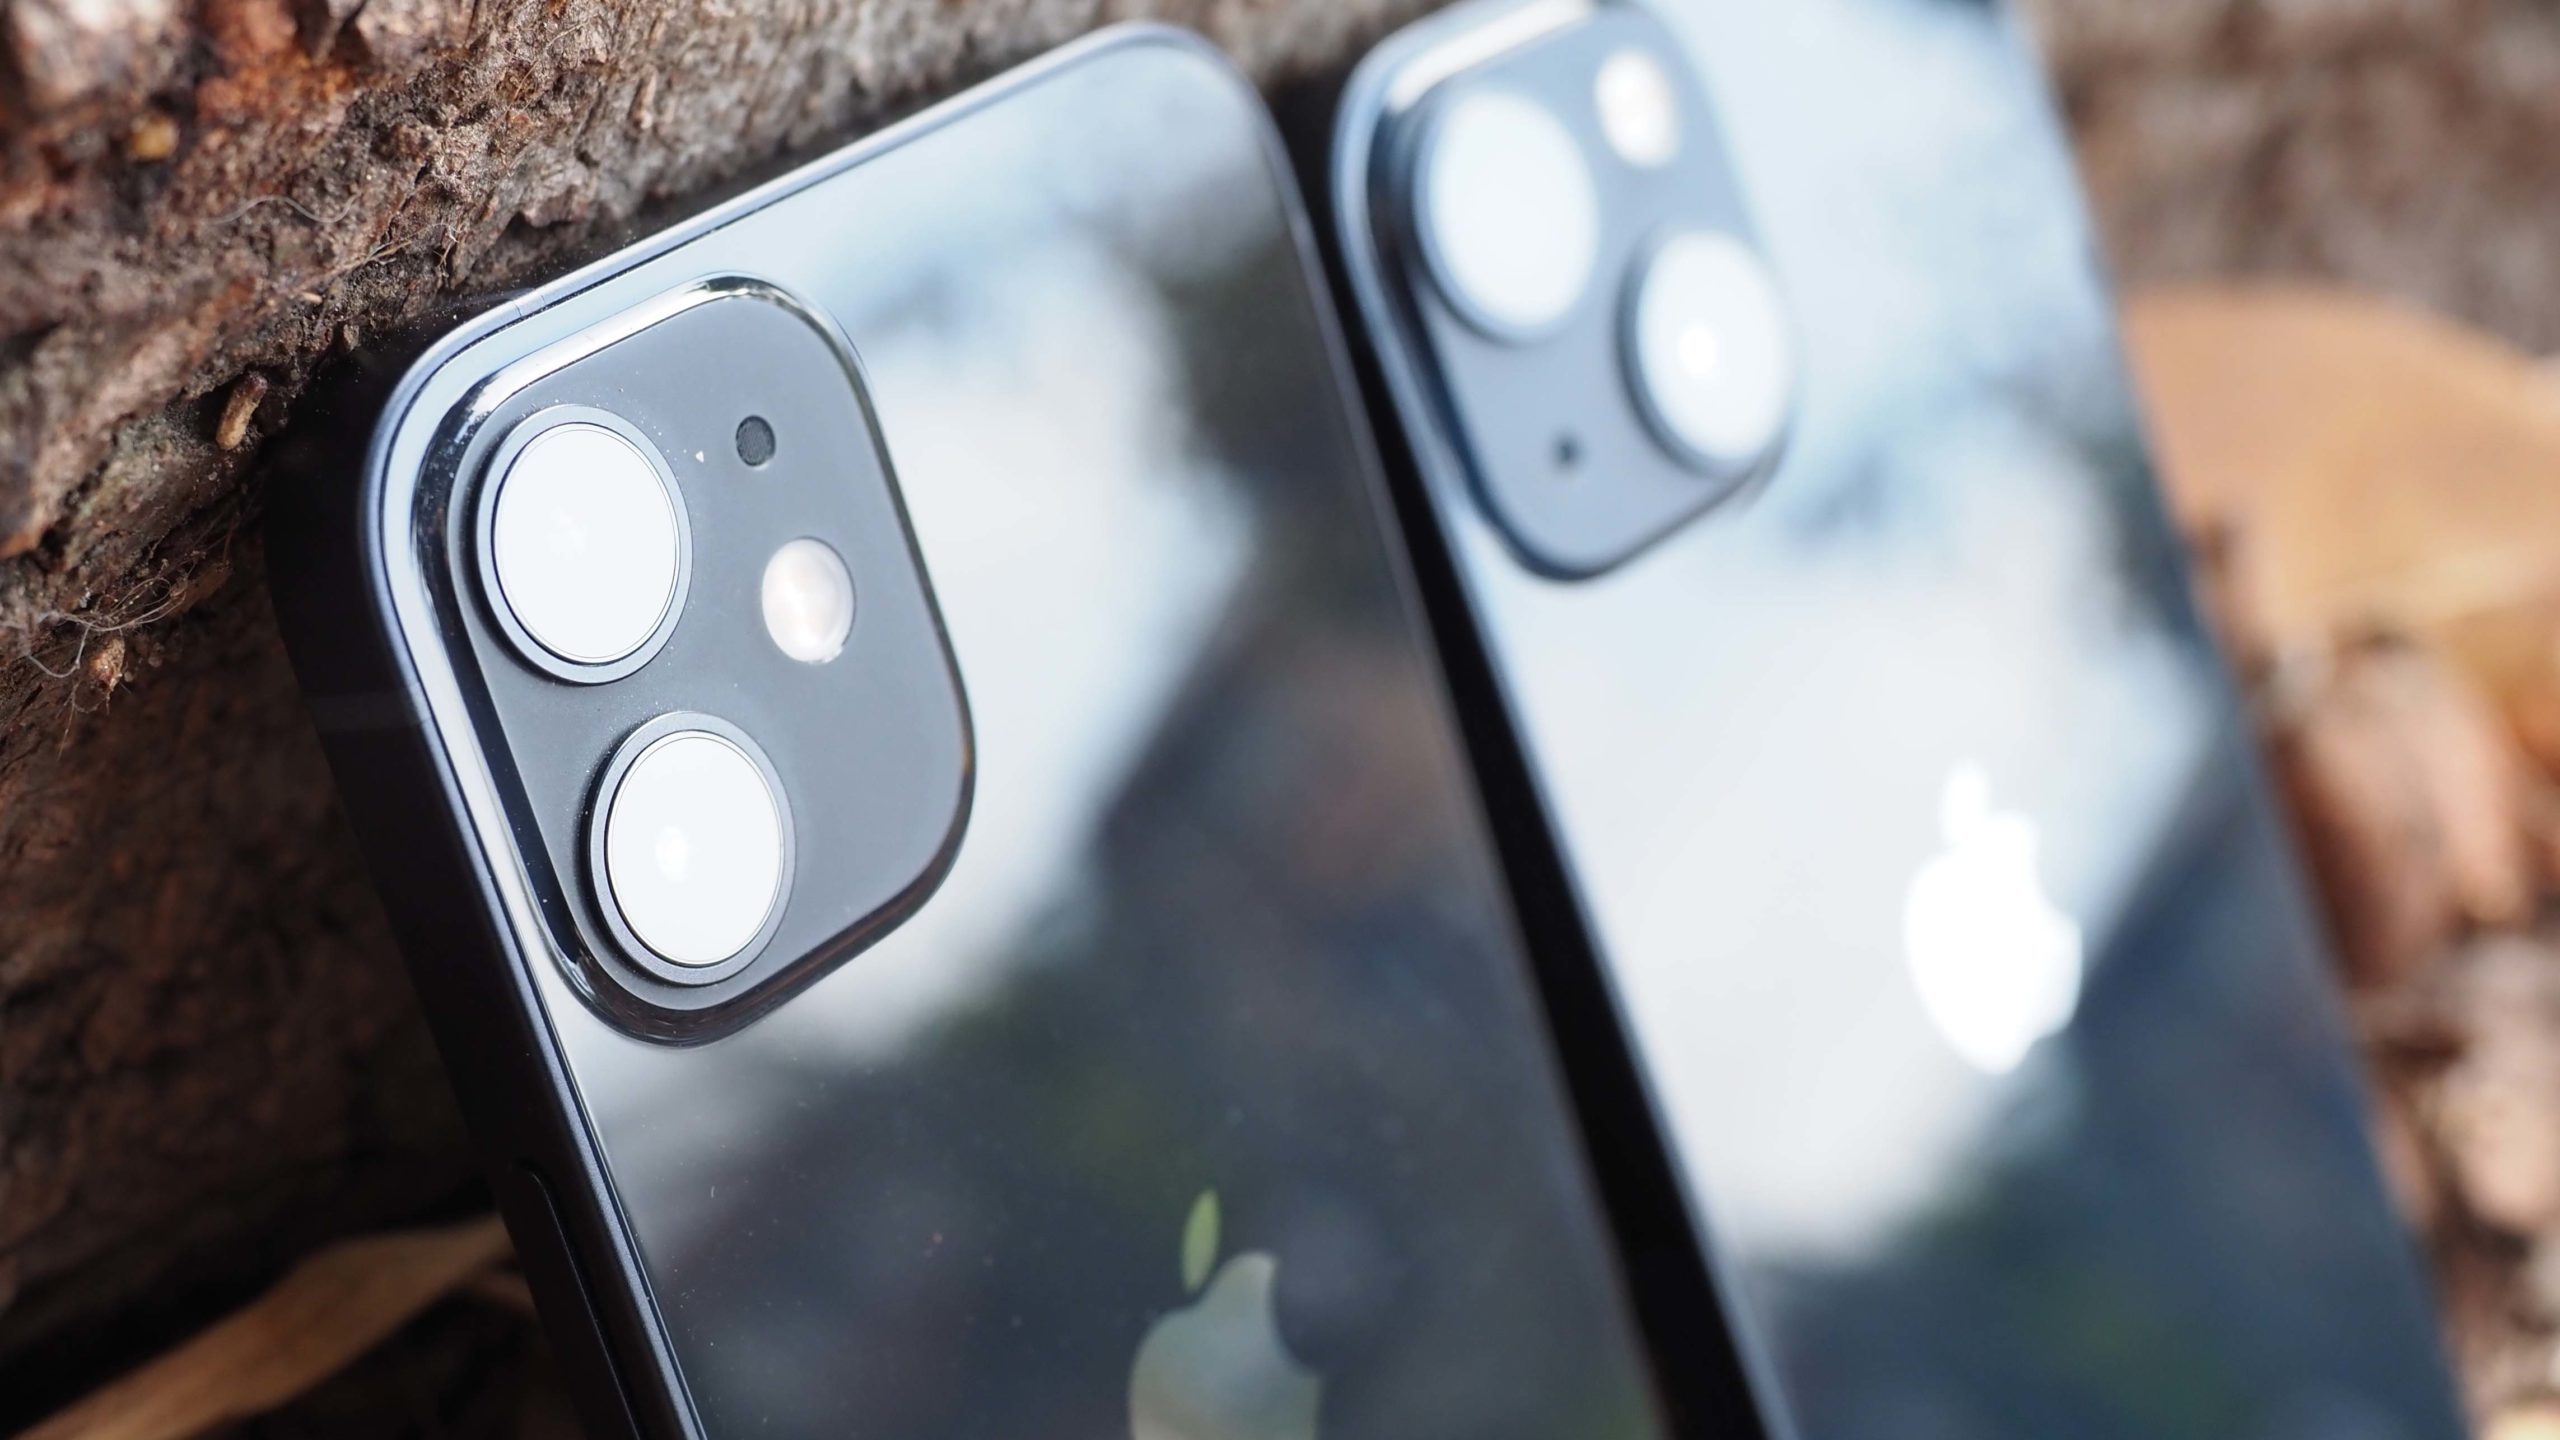 The iPhone 12 Mini (left) has smaller lenses stacked vertically. The 13 Mini (right) has a new lens placement with an overall larger camera module. (Photo: Caitlin McGarry/Gizmodo)